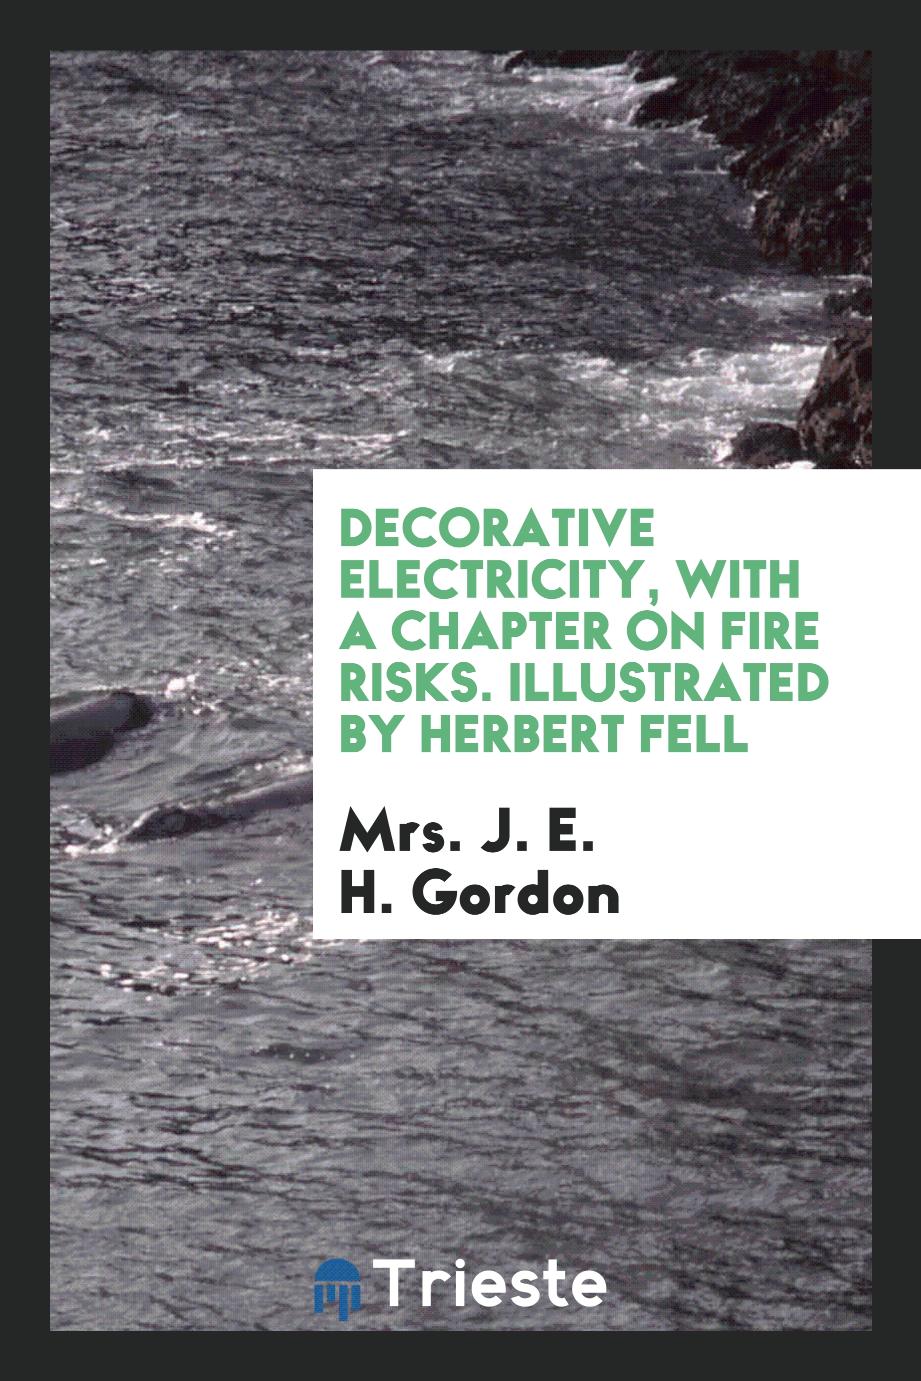 Decorative Electricity, with a Chapter on Fire Risks. Illustrated by Herbert Fell